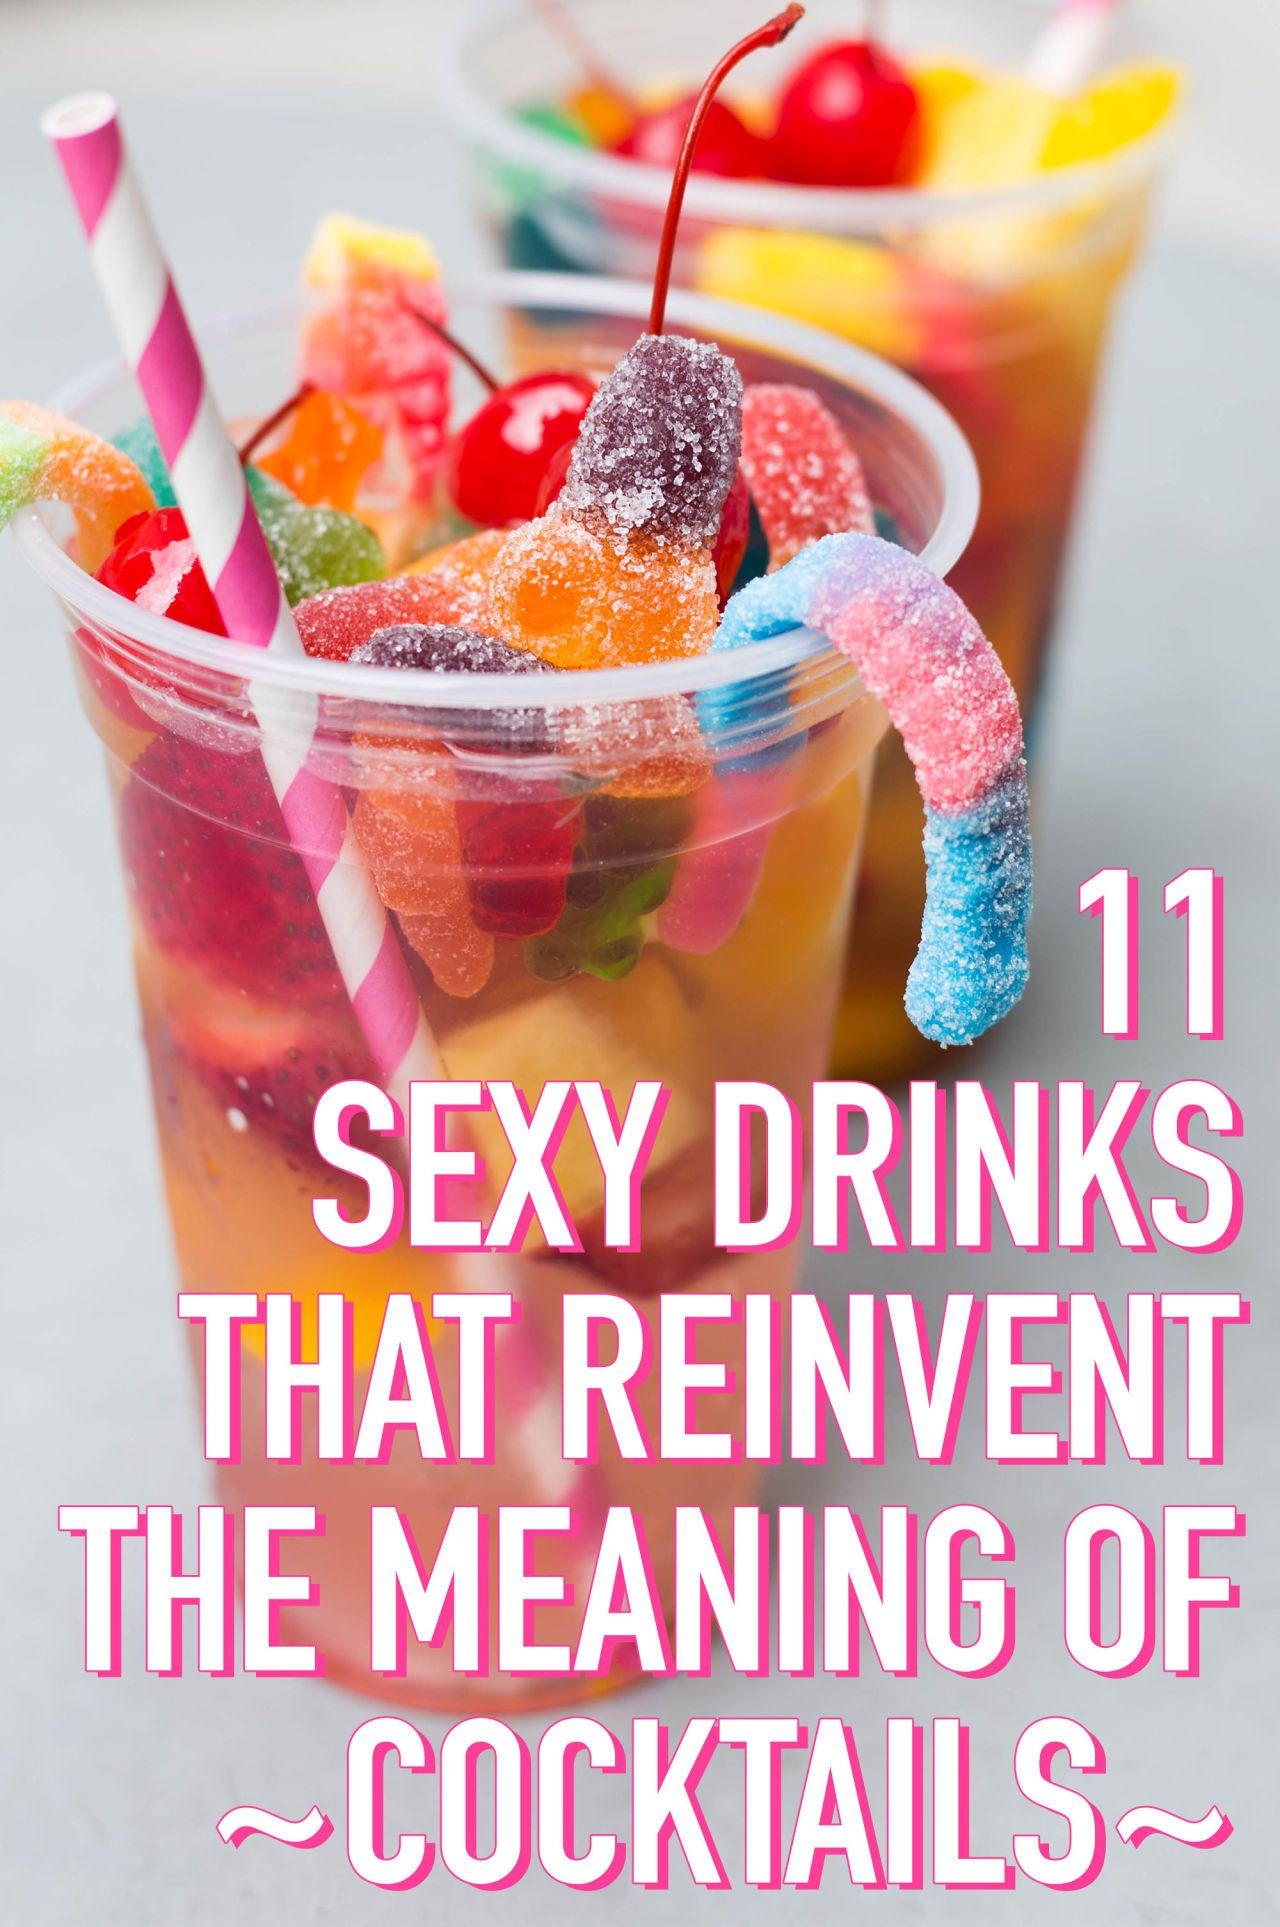 Bachelorette Party Drinks Ideas
 10 y Drinks That Reinvent the Meaning of Cocktails